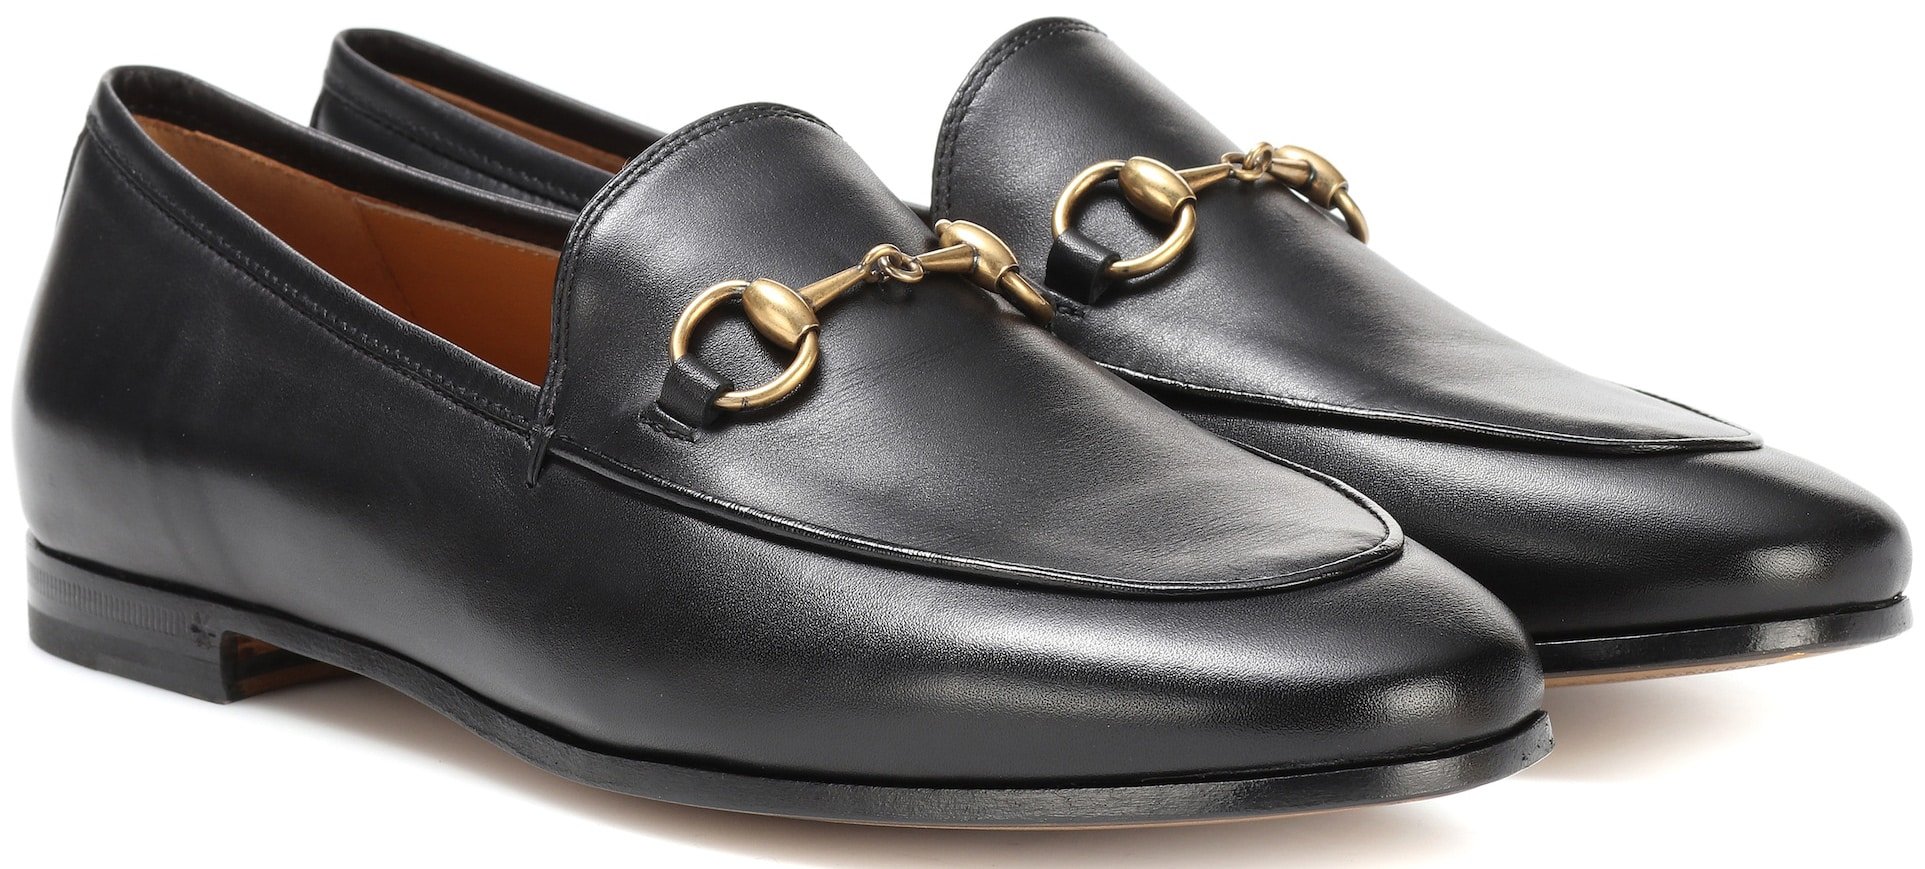 An iconic pair of Gucci loafers easily identified by the horsebit detail